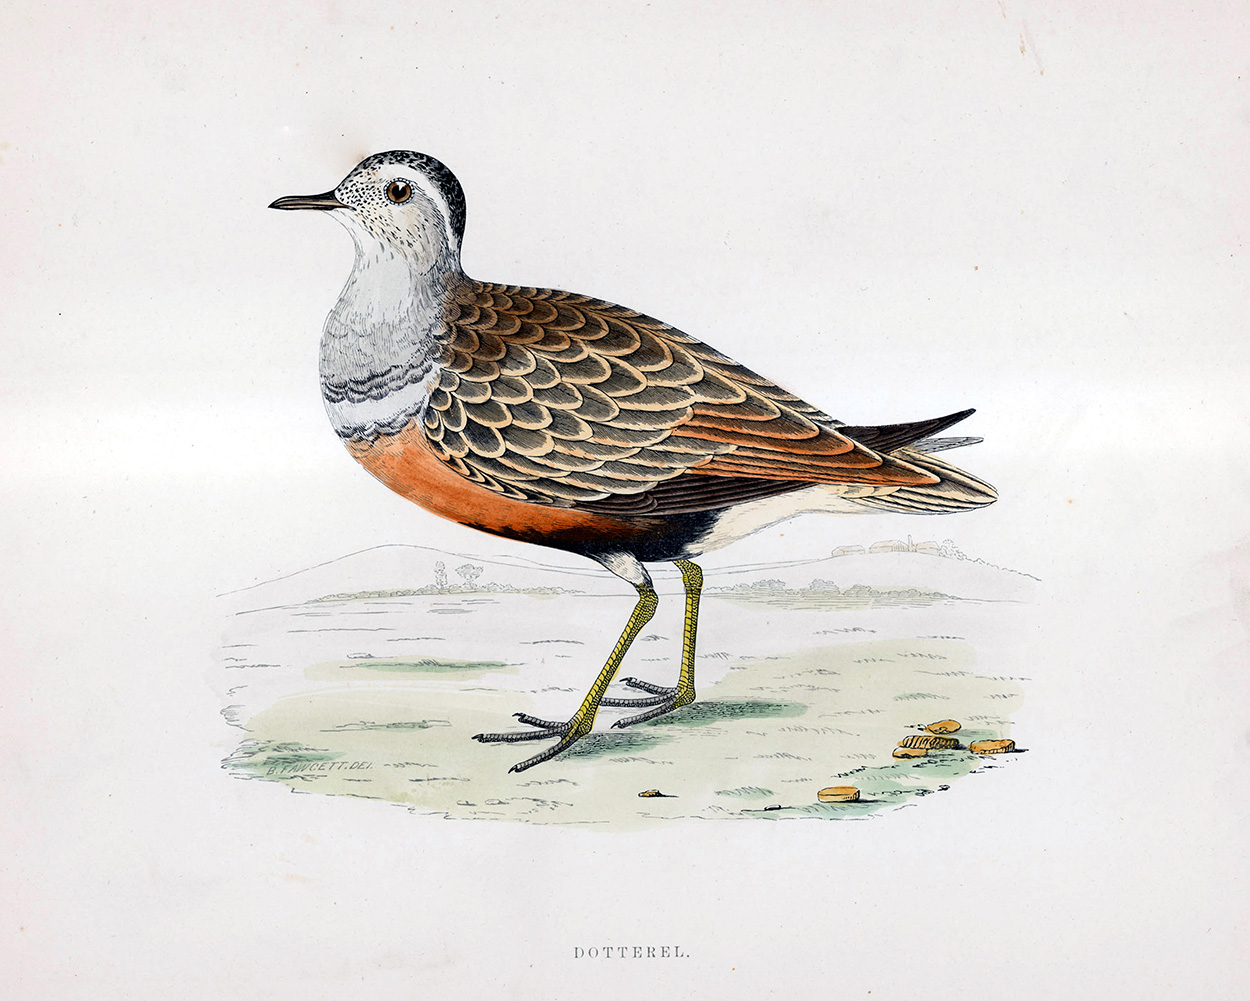 Dotterel - hand coloured lithograph 1891 (Print) art by Beverley R Morris at The Illustration Art Gallery